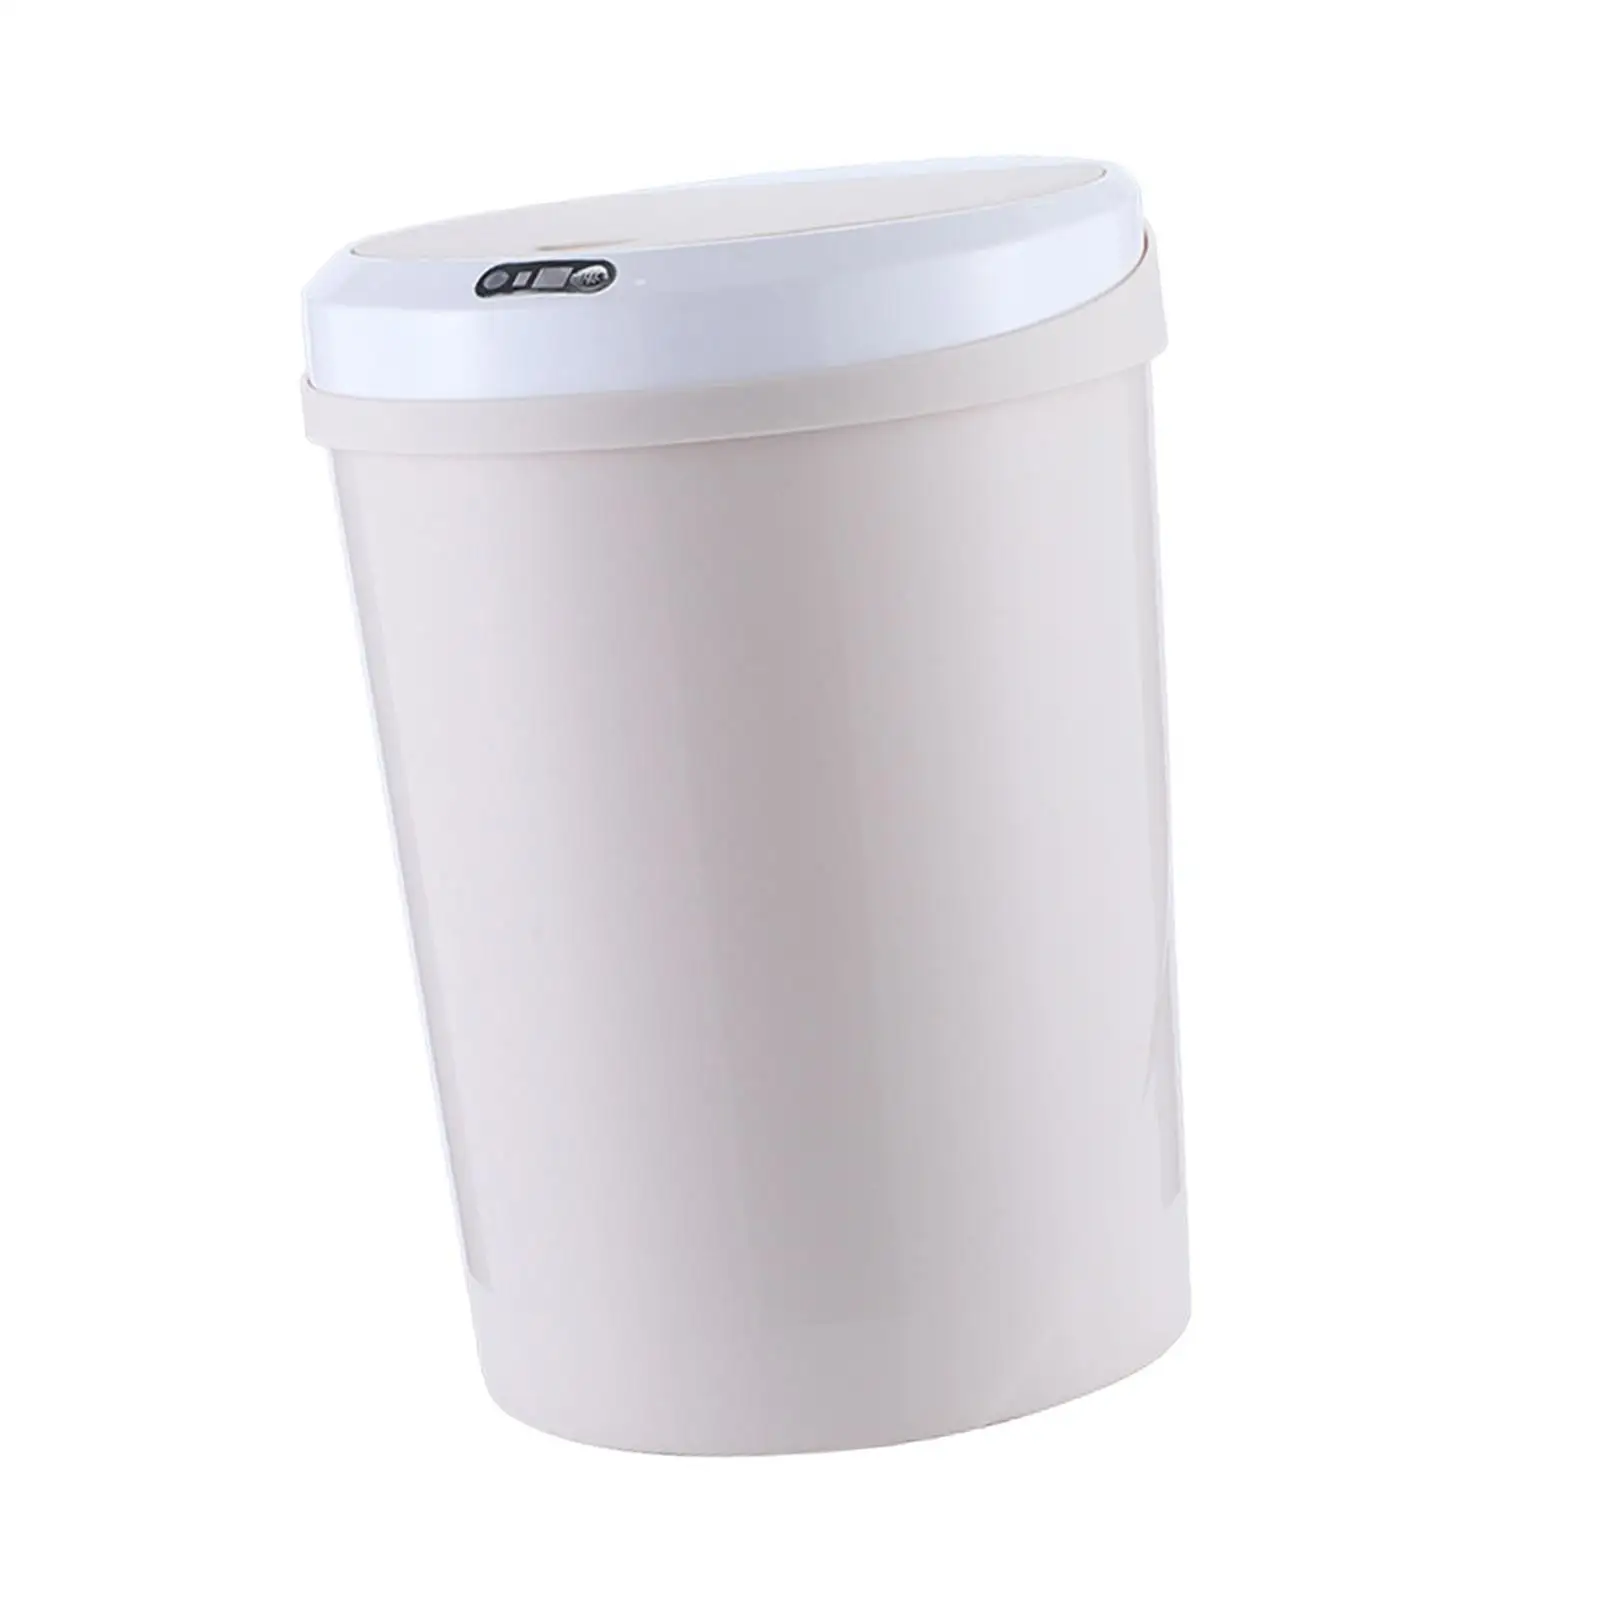 Touchless Garbage Bin 12L Garbage Bucket Sensor Trash Can Electric Garbage Can for Living Room Office Bathroom Toilet